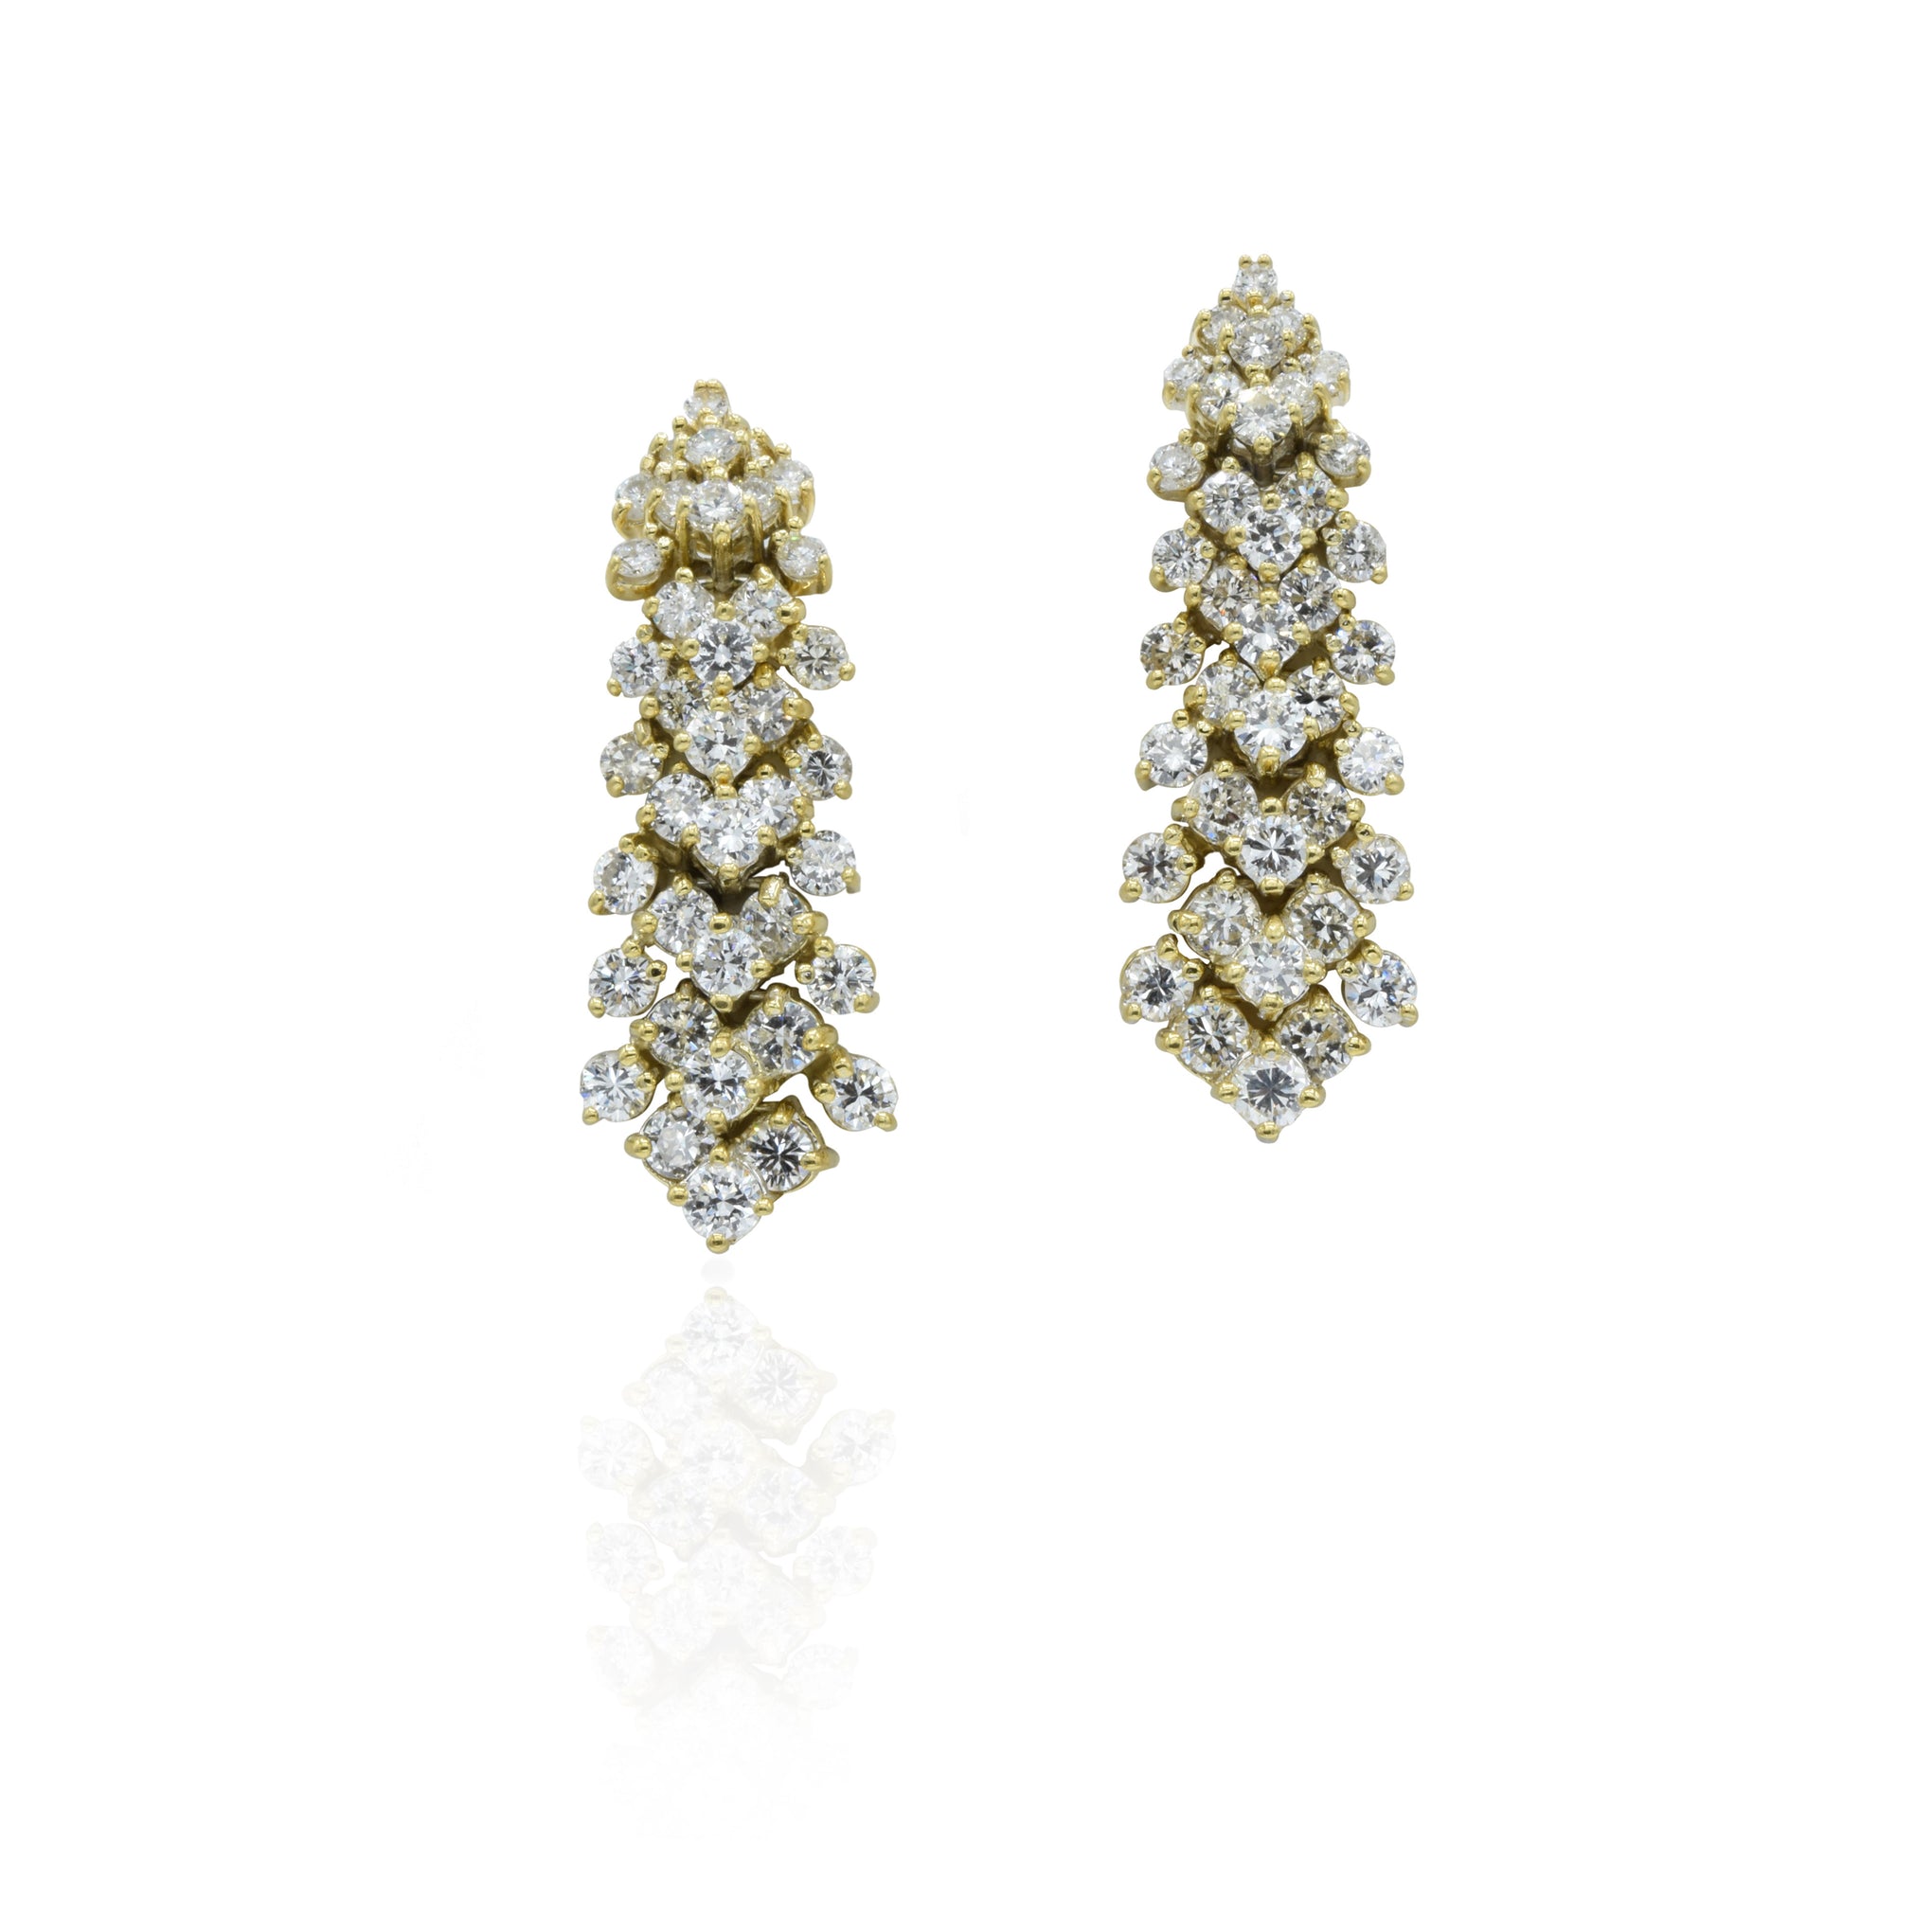 18KT Yellow Gold And Diamond Estate Earrings